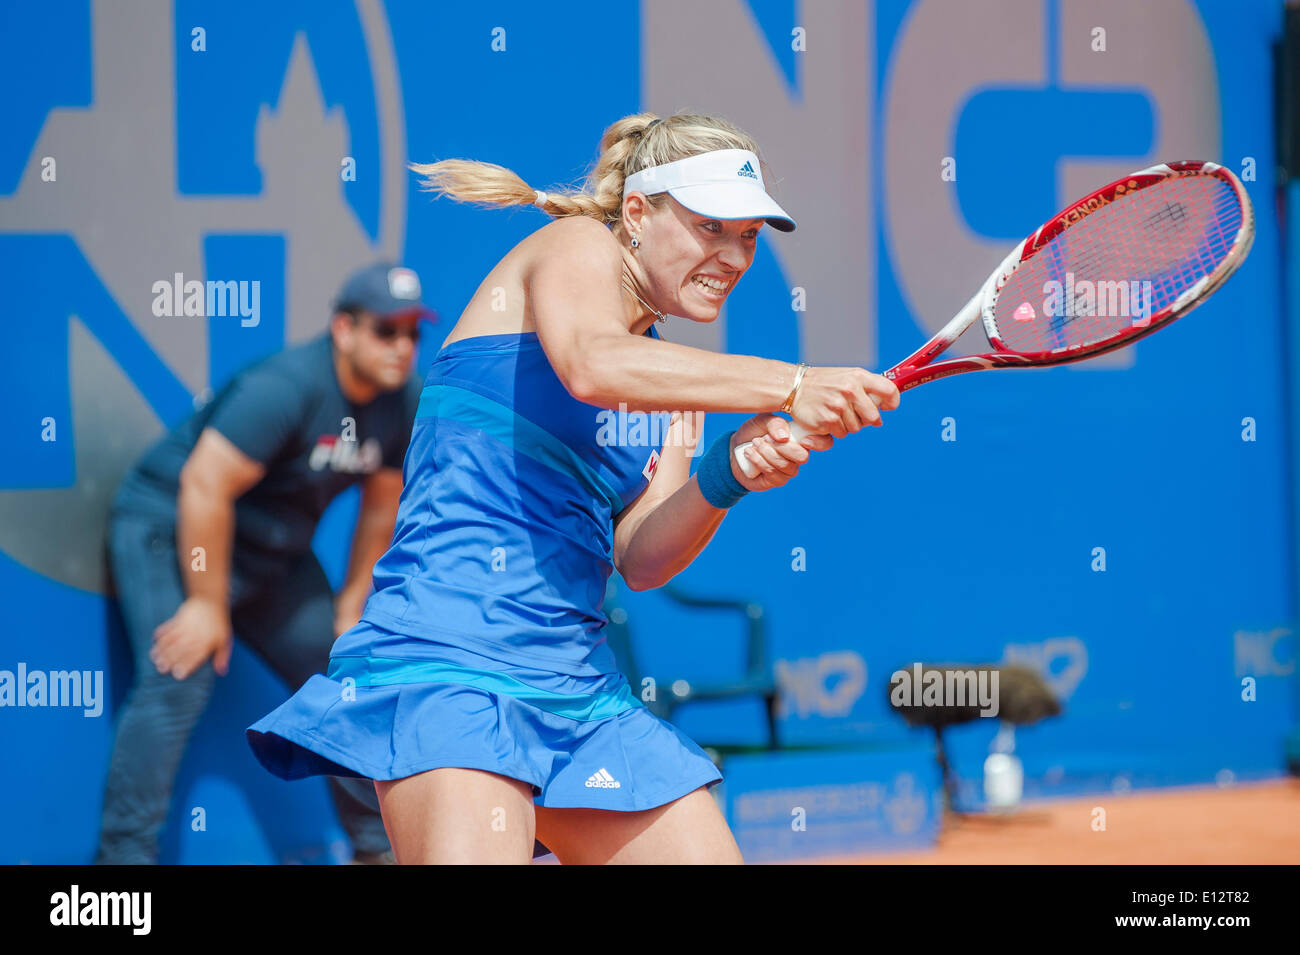 Damen Tennis High Resolution Stock Photography and Images - Alamy